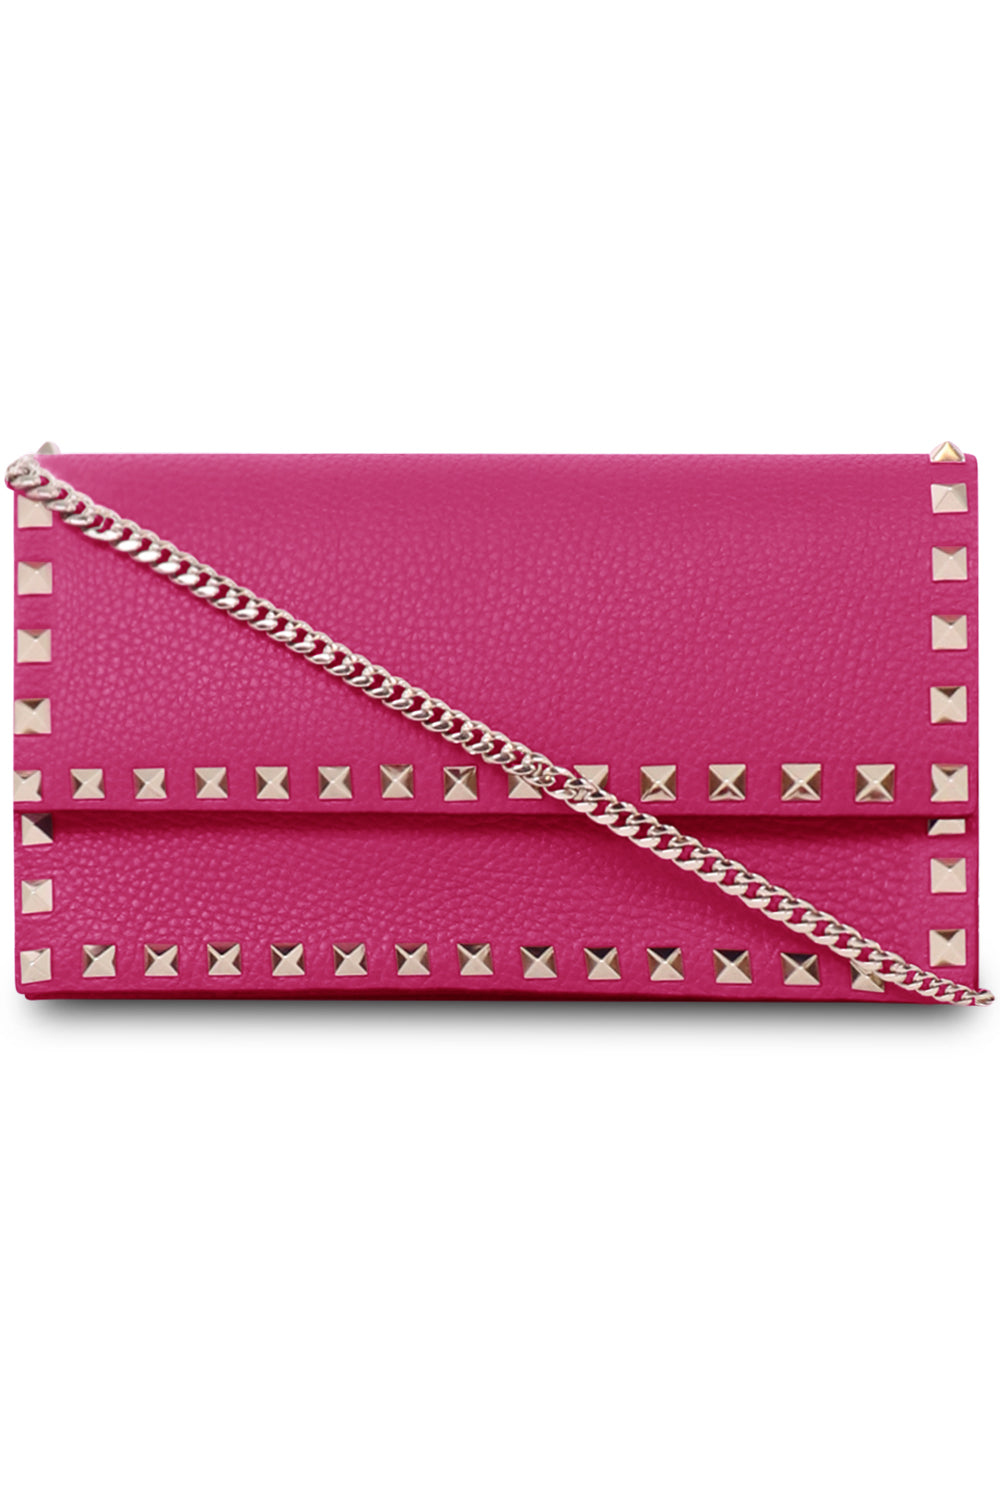 Brand New Valentino Wallet On Chain WOC Clutch In Nude Pink Ready With Strap